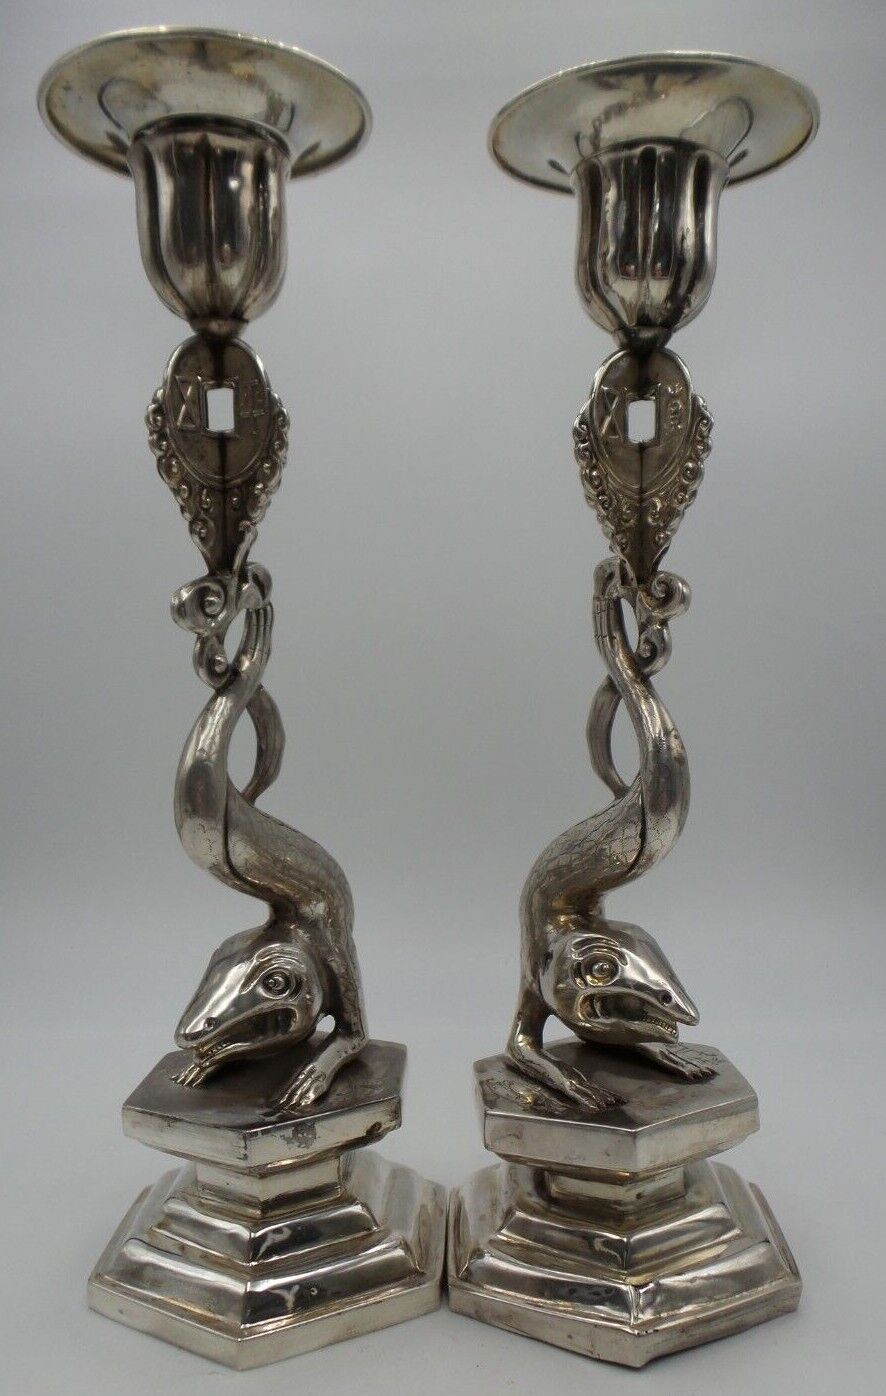 Pair Of Incredible Antique 19th Century Chinese Export Silver Candle Holders